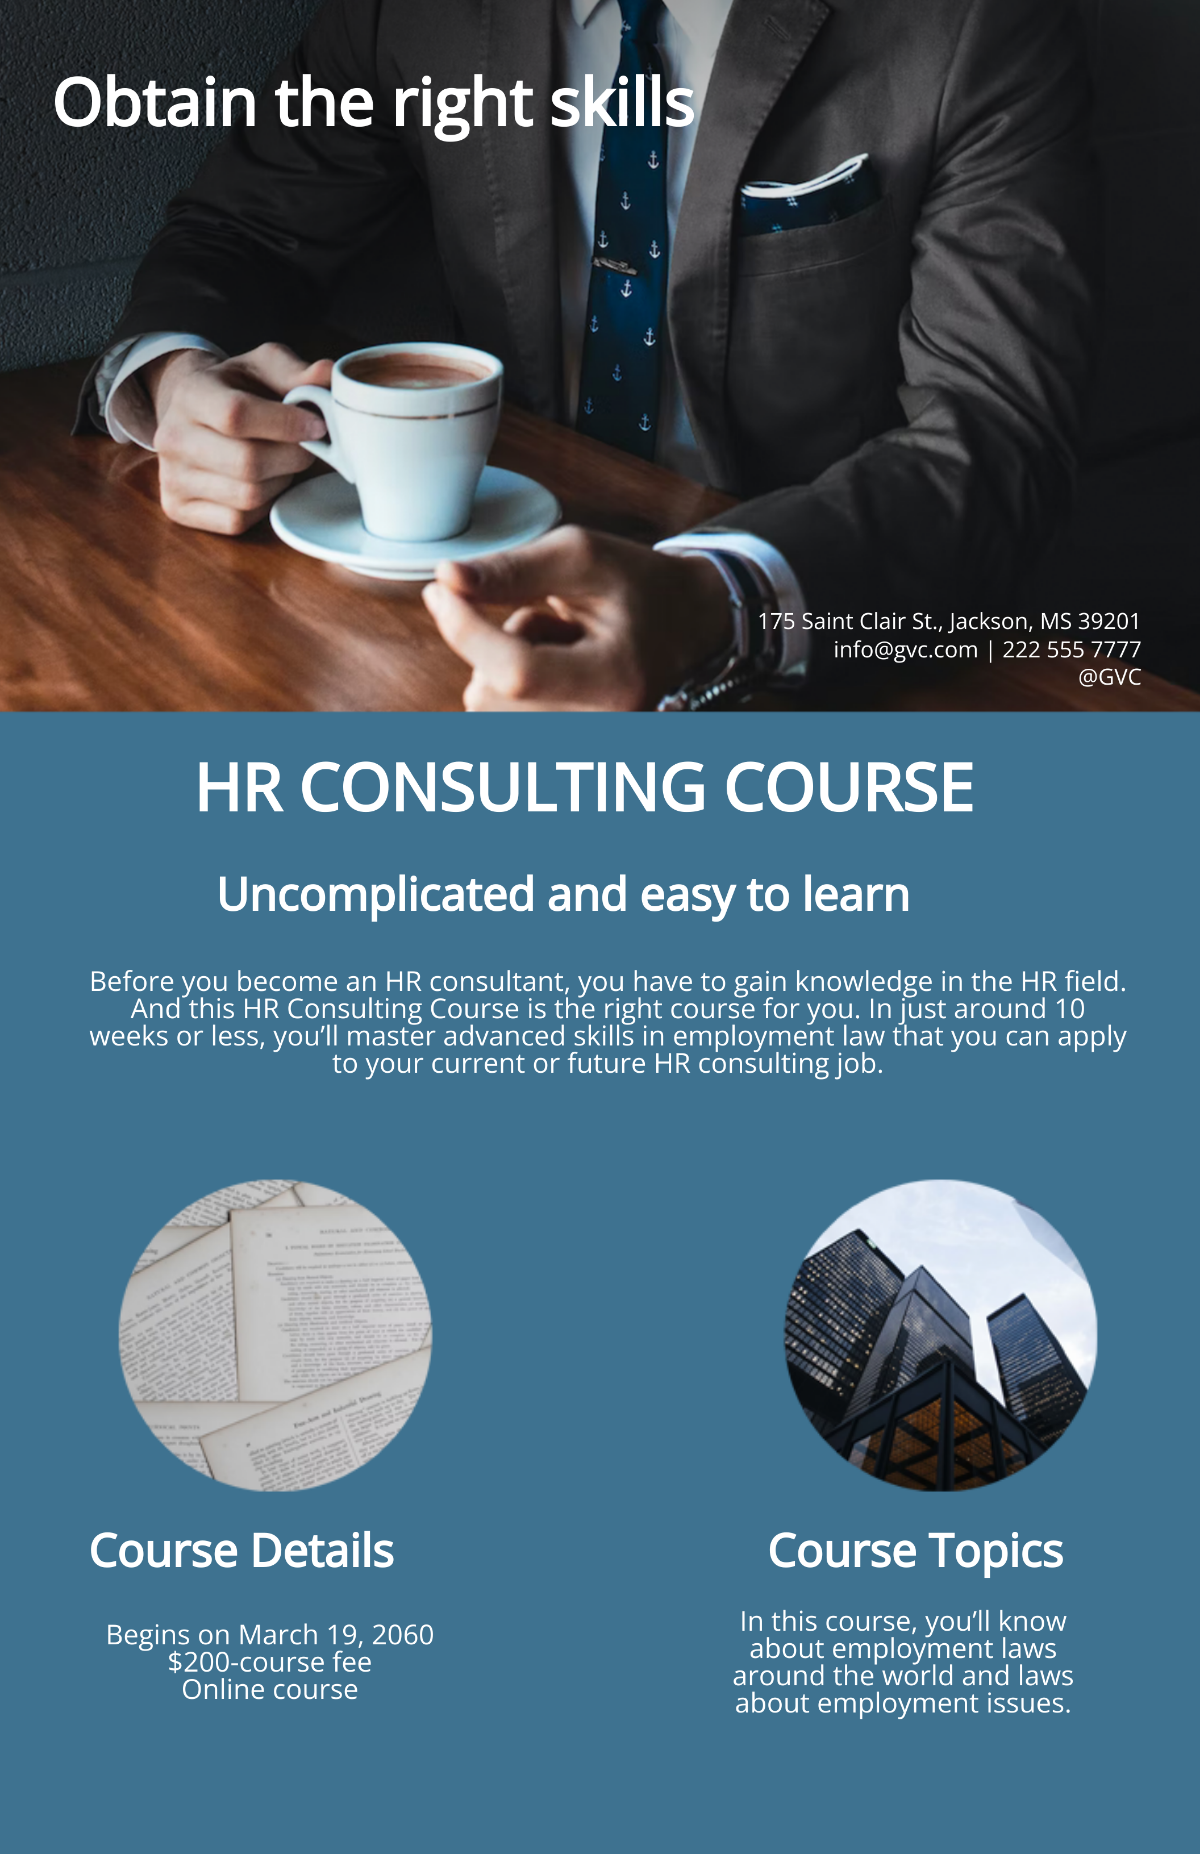 HR Consulting Course Product Sell Sheet Template